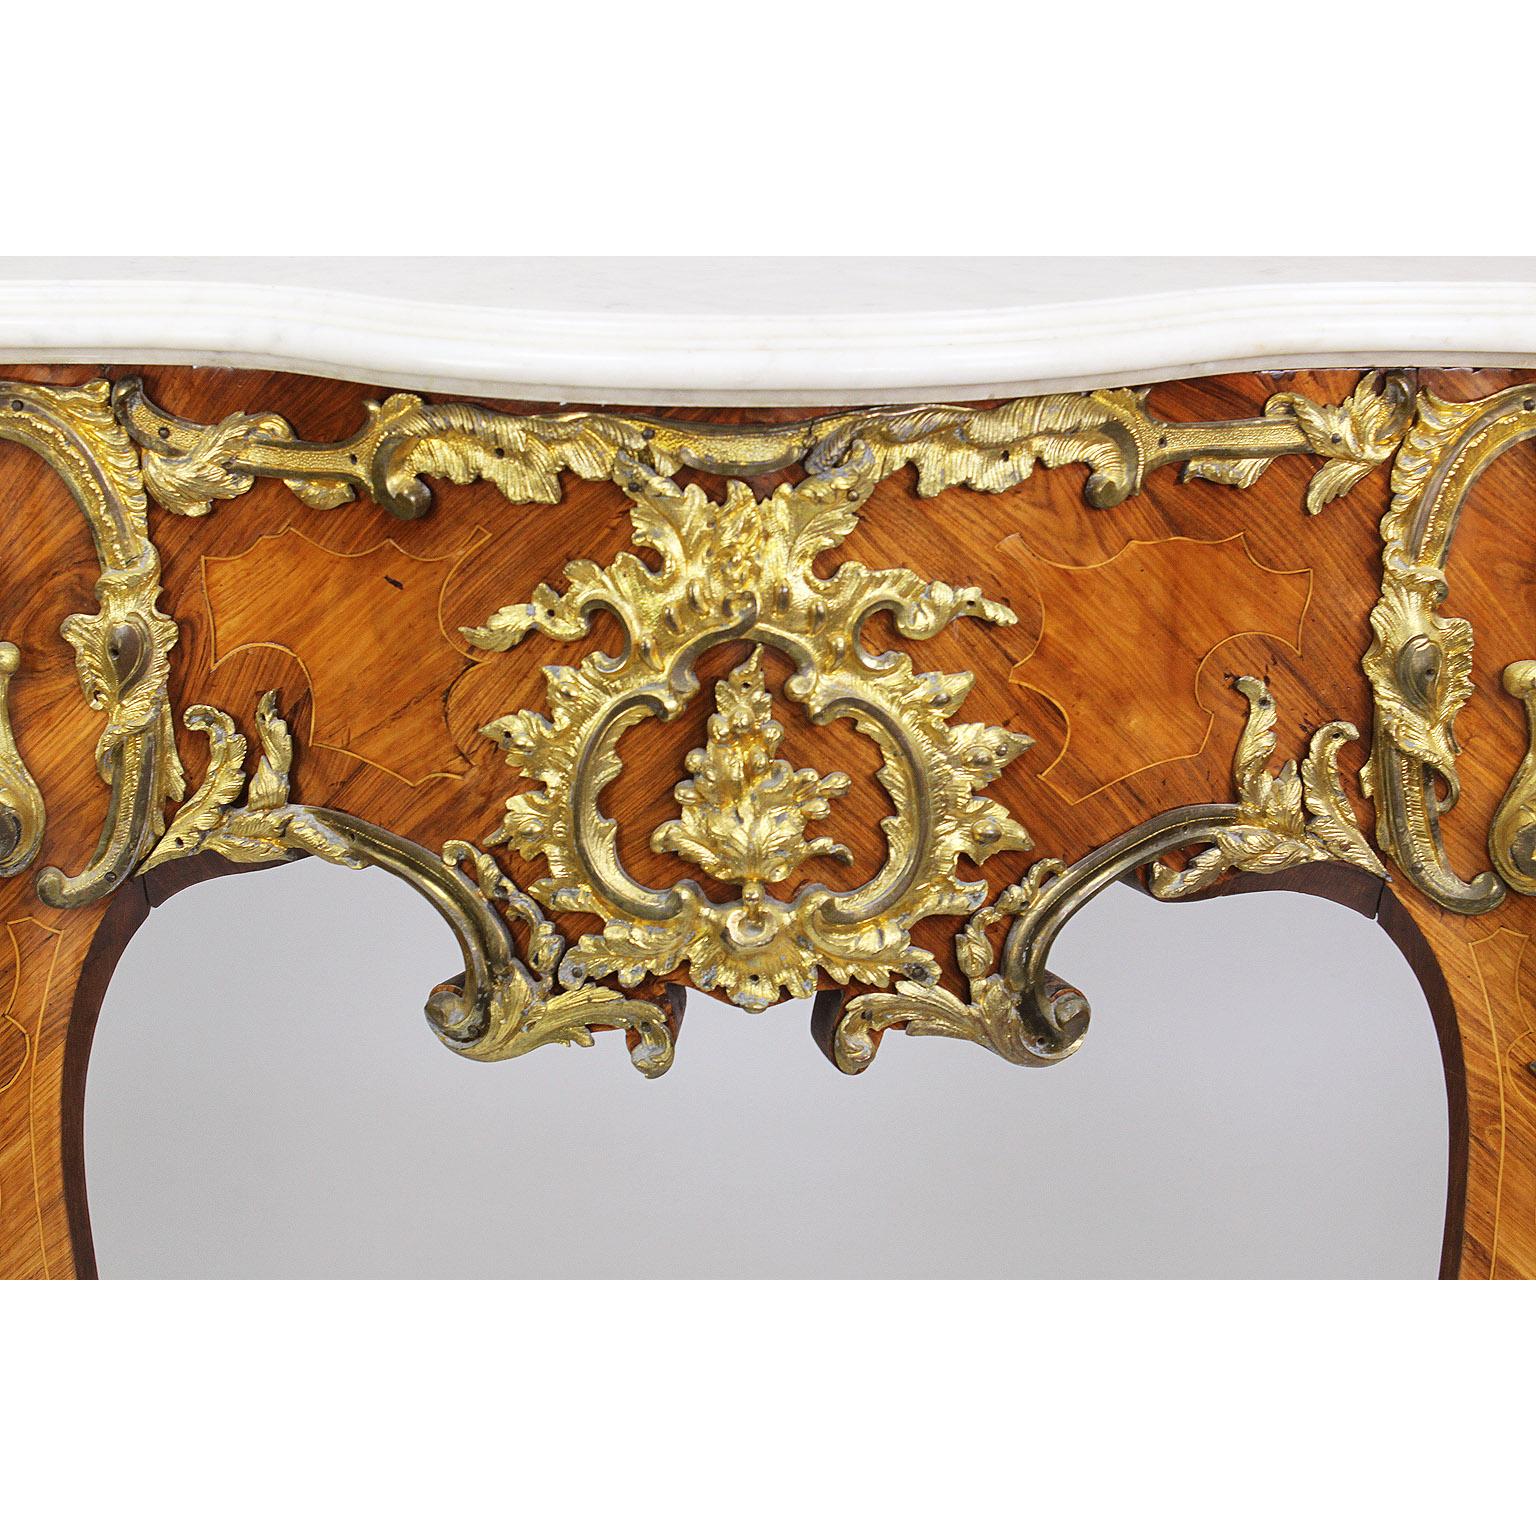 Veneer French 19th Century Louis XV Style Ormolu-Mounted Console After Charles Cressent For Sale